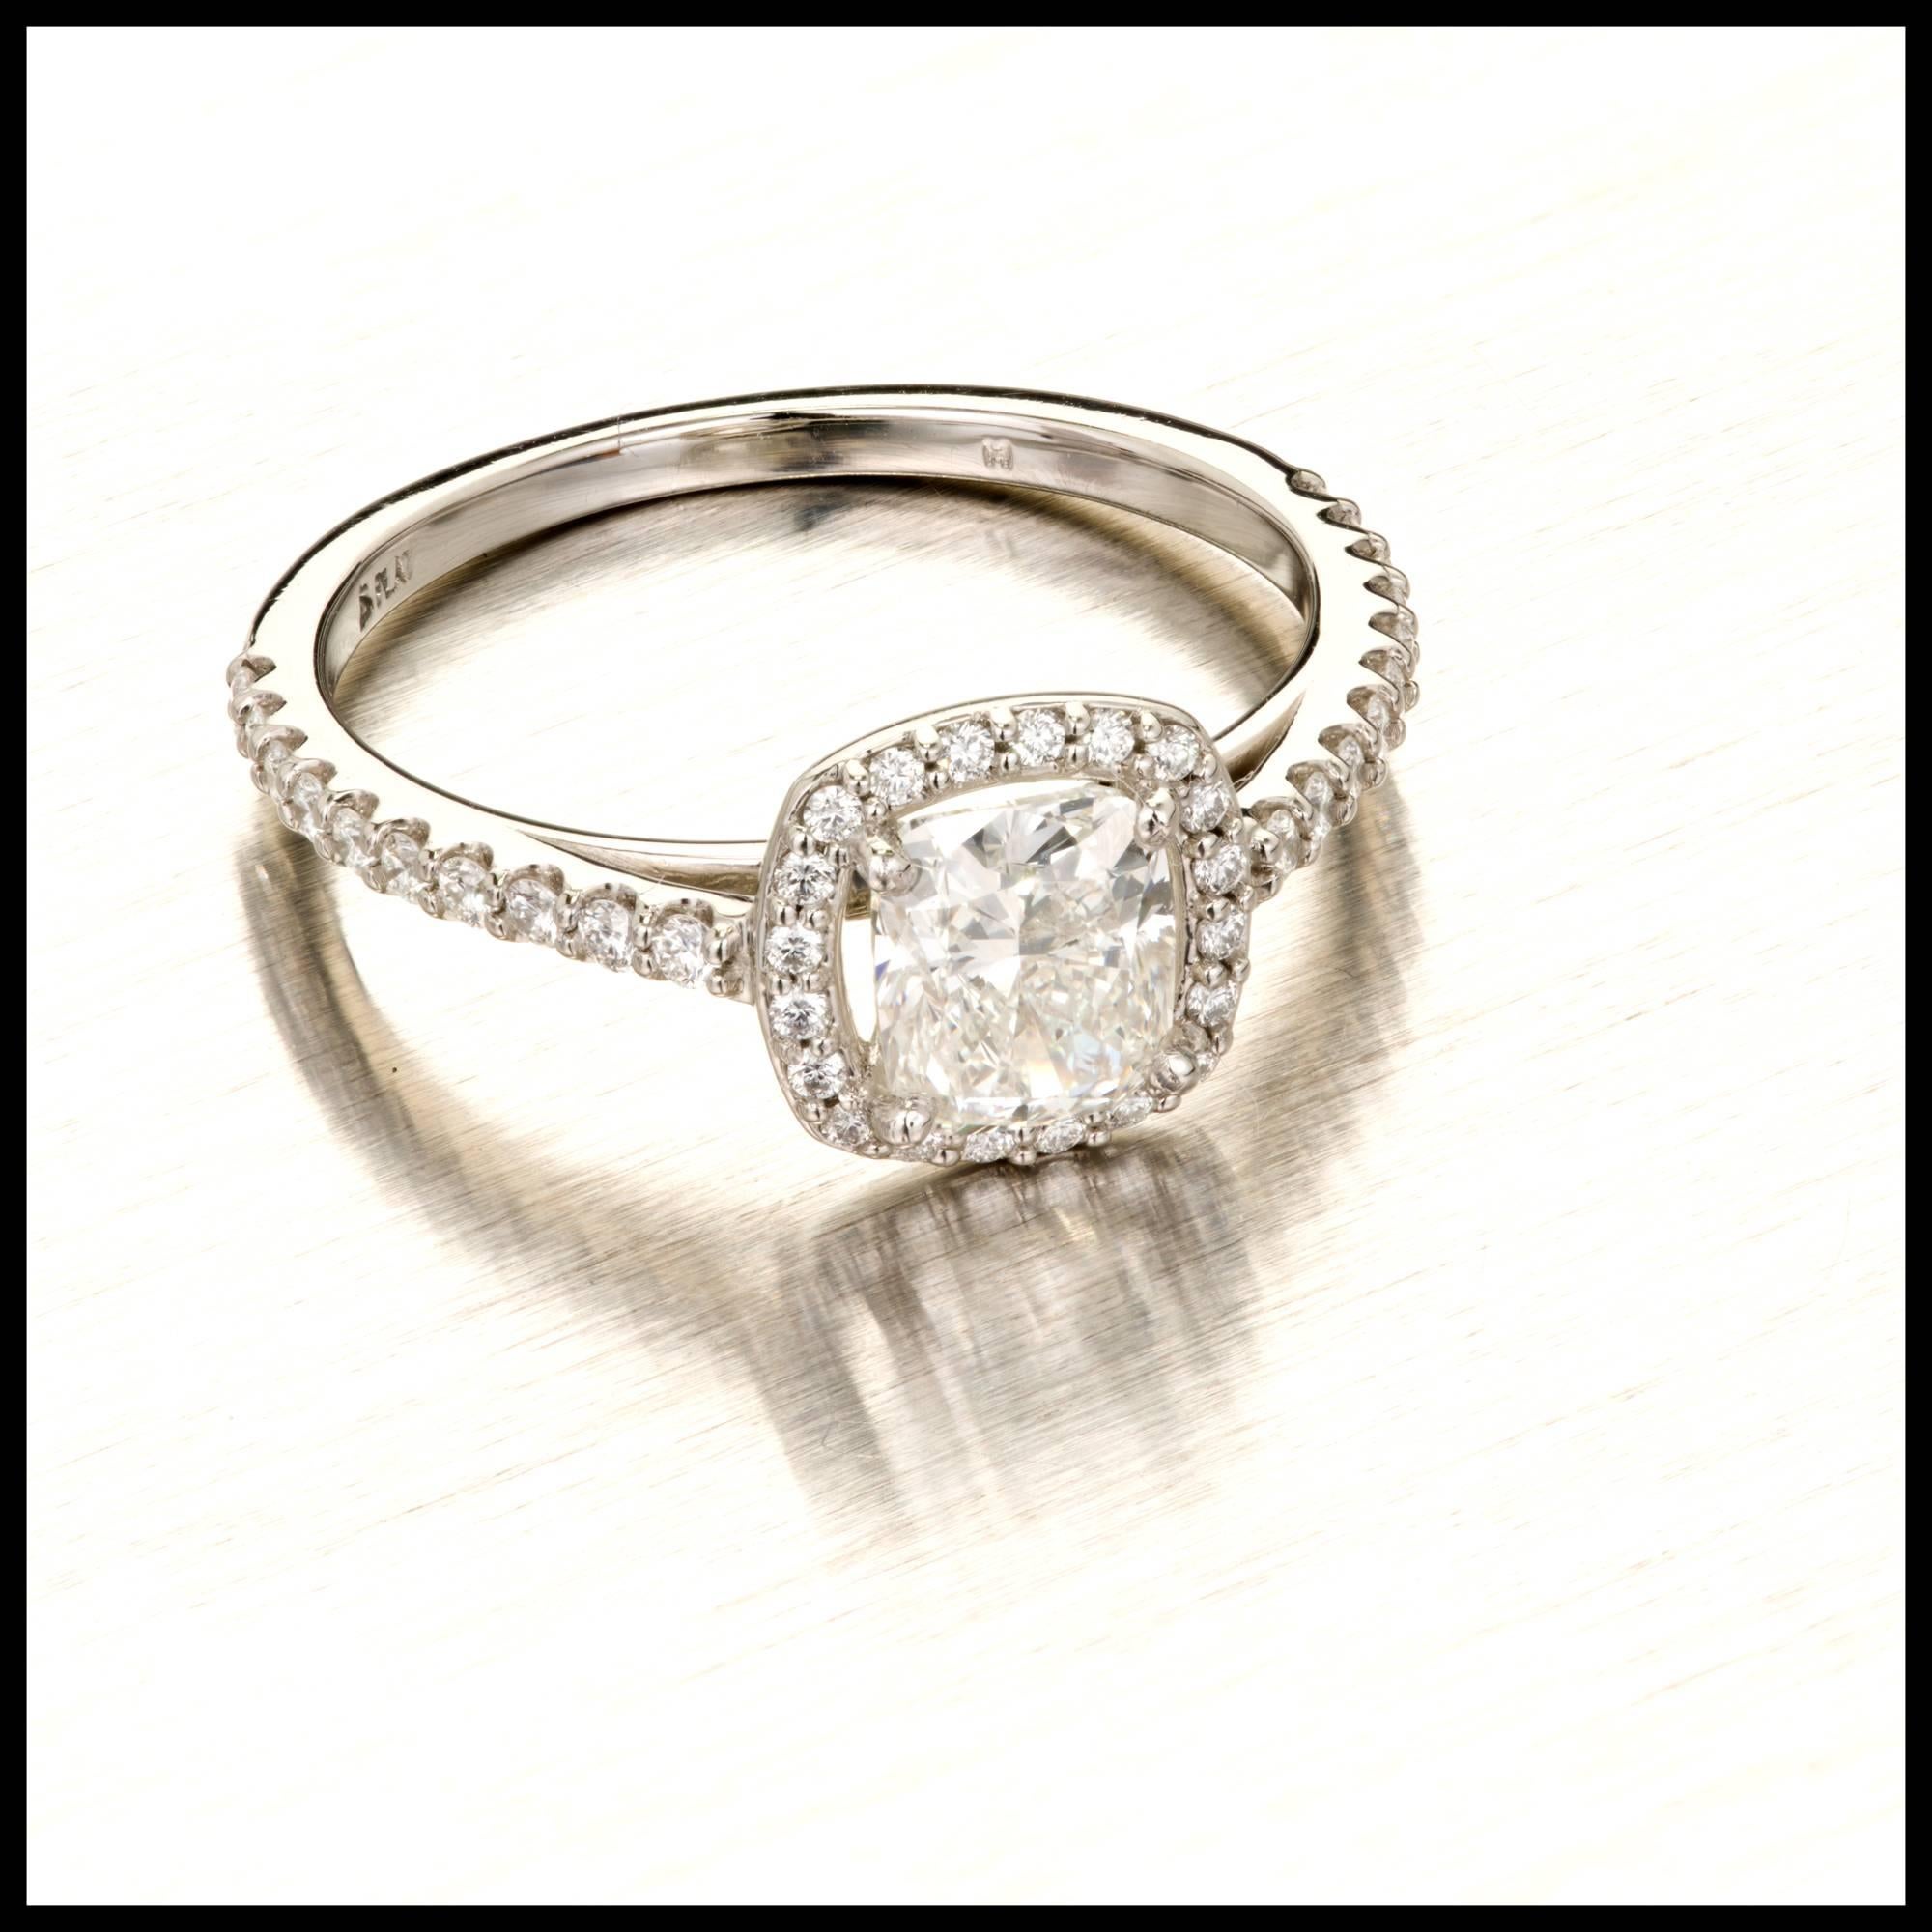 Peter Suchy cushion halo Diamond engagement ring in solid Platinum with a bright sparkly center cushion cut GIA certified Diamond and high grade full cut round Diamond accents. Carefully designed and made so a wedding band will fit flush next to